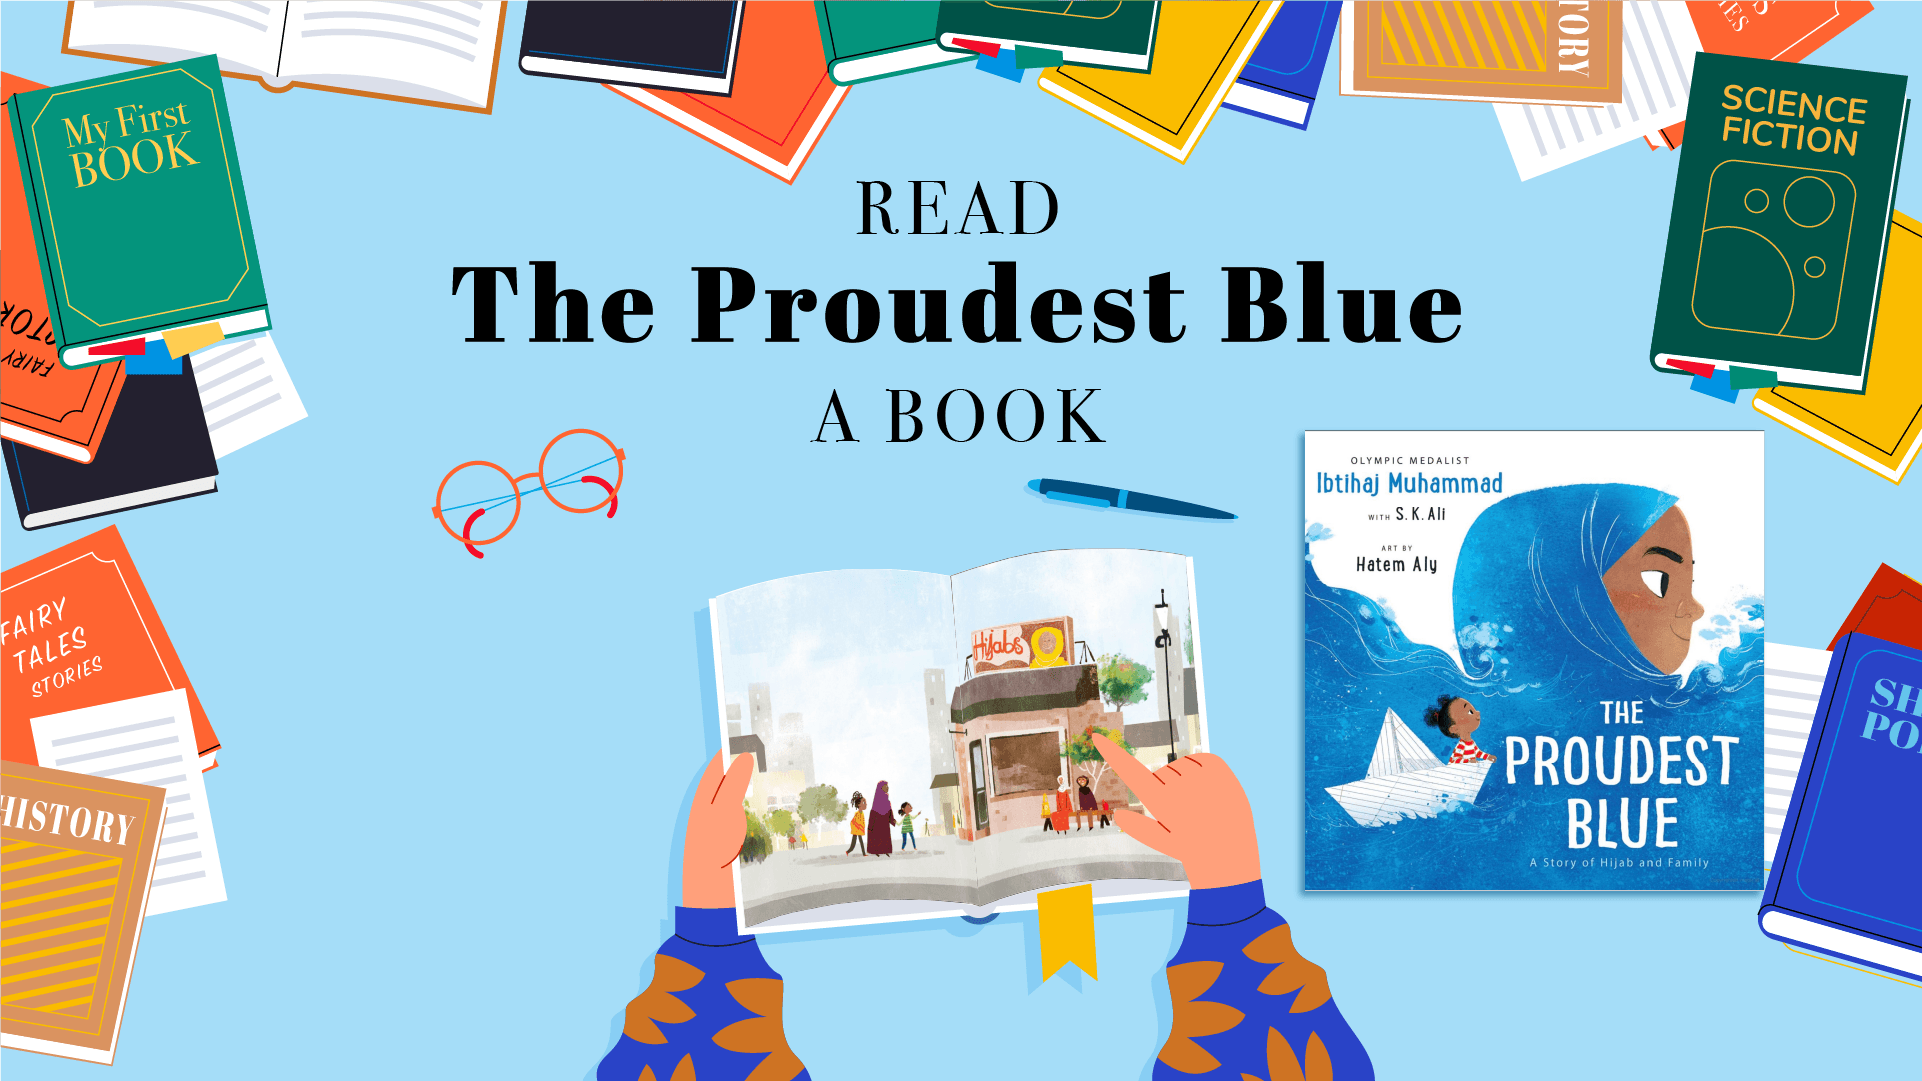 Books border, headline- first line: READ second line: The Proudest Blue third line: A BOOK graphics of orange glasses, blue pen, a person opening a book and point at the two spread pages from The Proudest Blue. The cover of The Proudest Blue on right side.